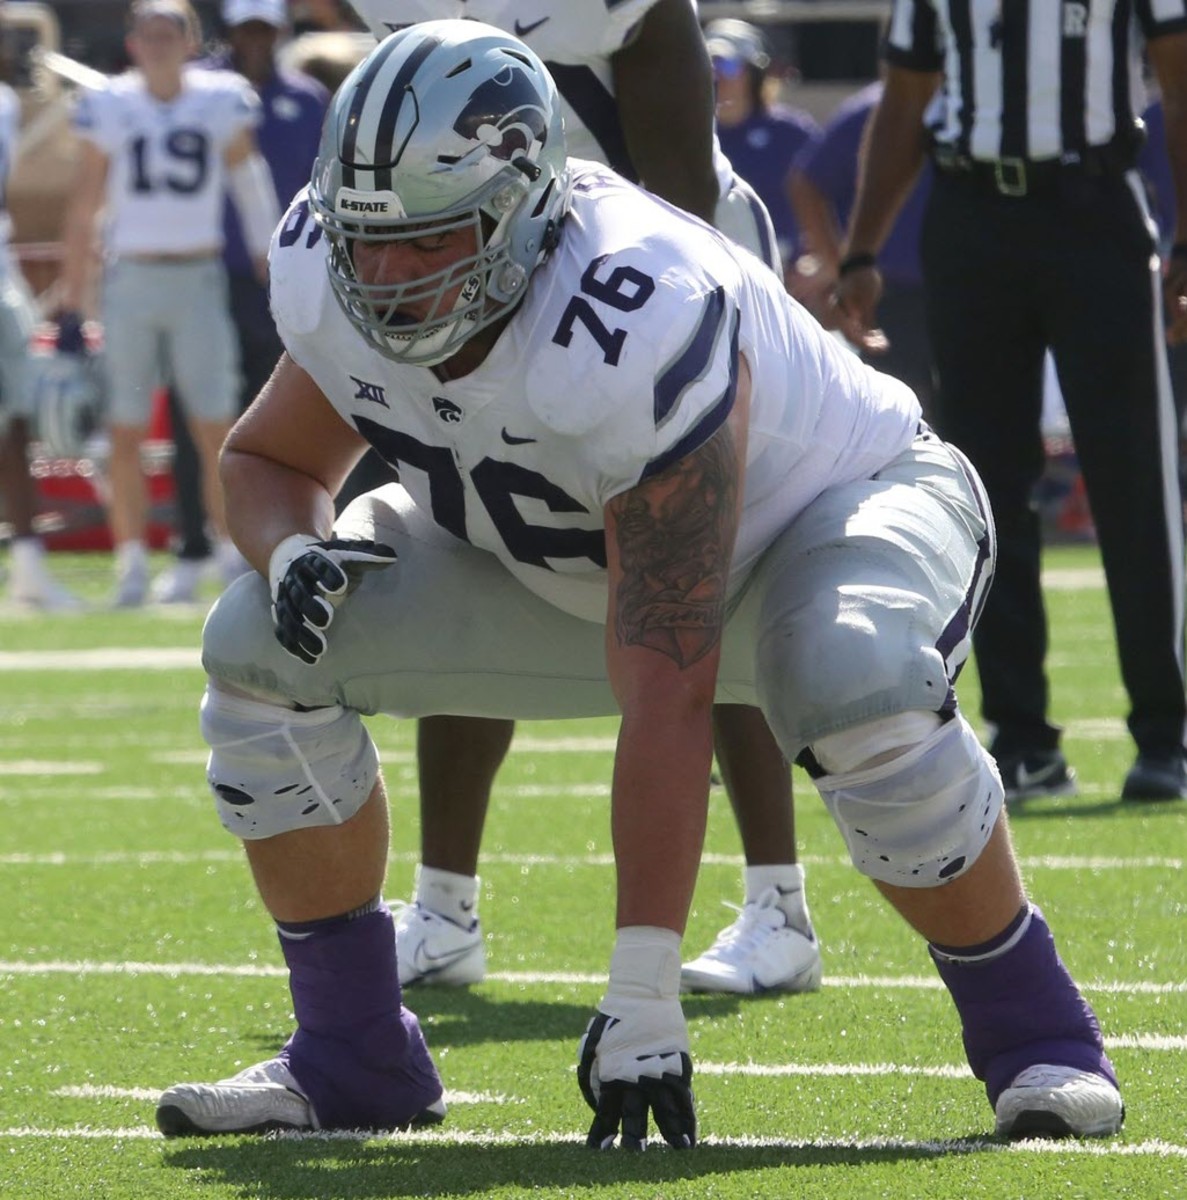 Oct 23, 2021; Lubbock, Texas, USA; Kansas State Wildcats offensive guard Josh Rivas (76) prepares to block against the Texas Tech Red Raiders in the first half at Jones AT&T Stadium.